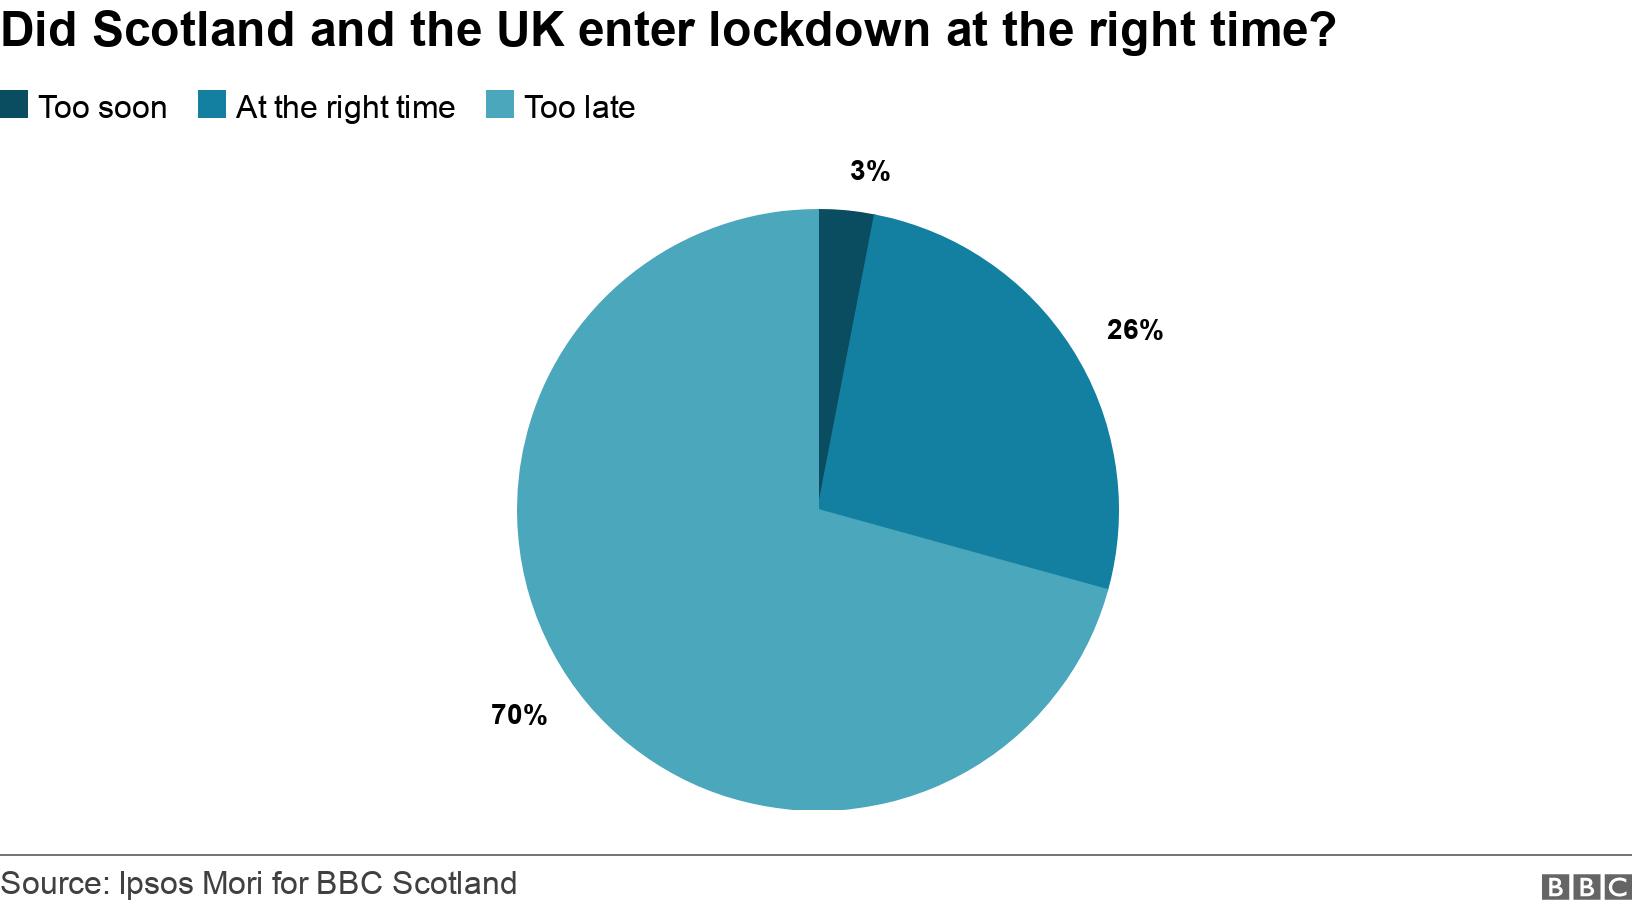 Did Scotland and the UK enter lockdown at the right time?. . 70% of respondents said the UK entered lockdown &quot;too late&quot;, to 3% &quot;too soon&quot; and 26% &quot;at the right time&quot;. .